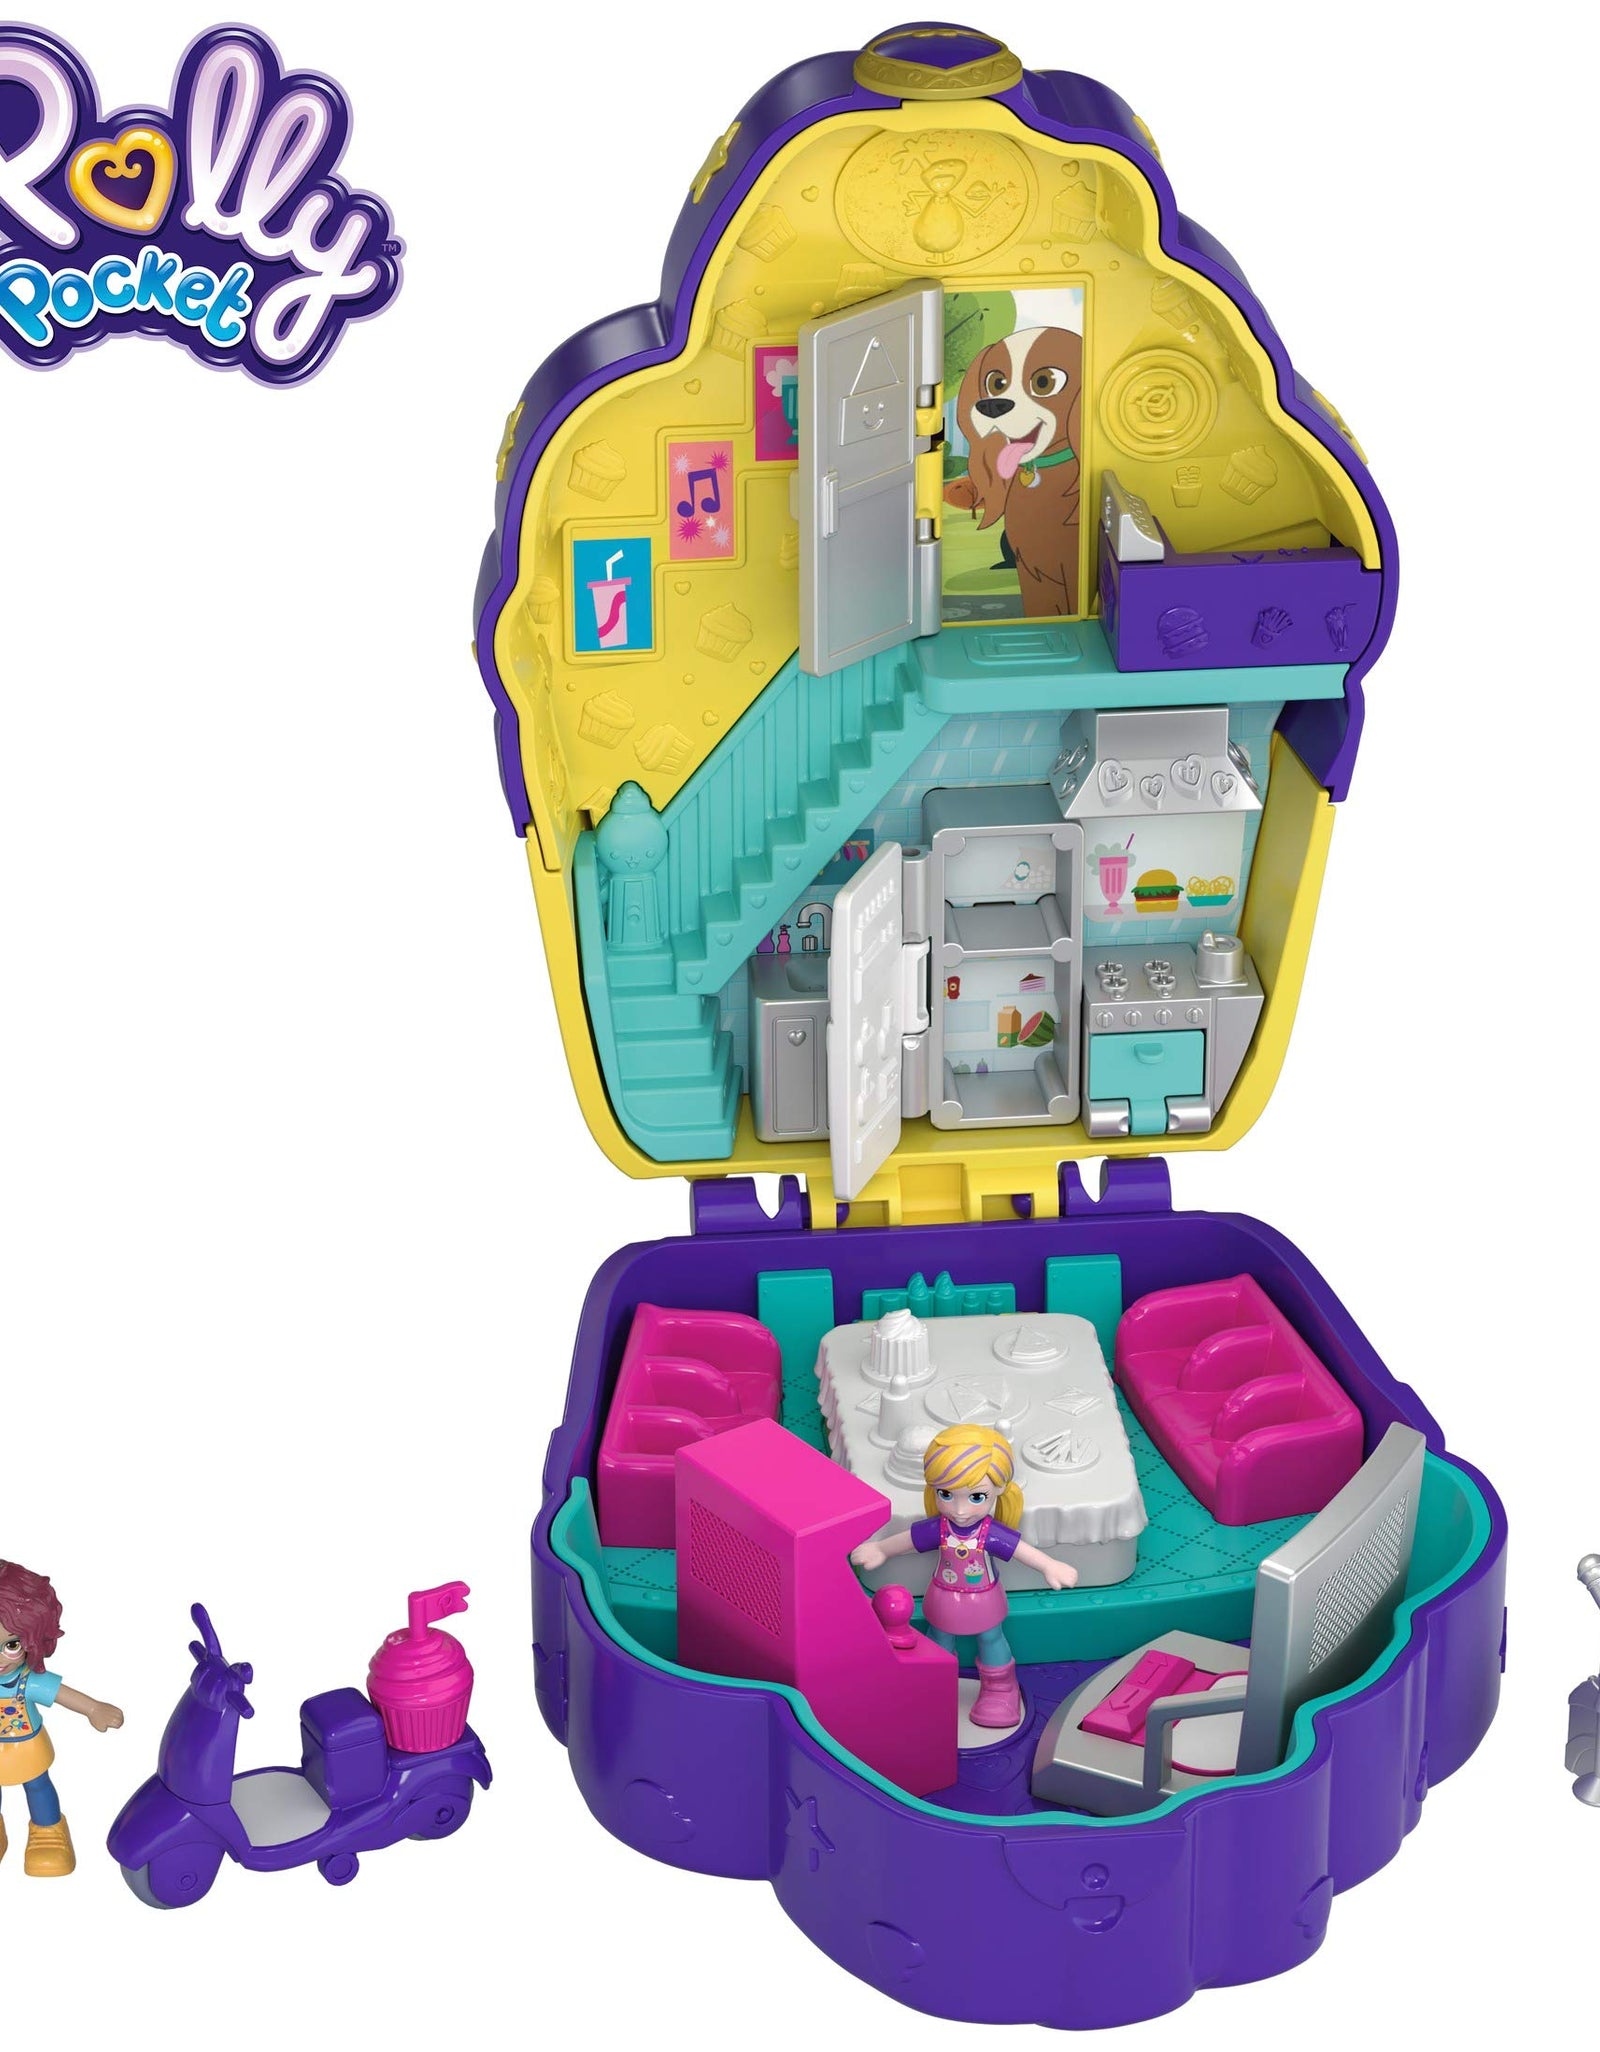 Polly Pocket Pocket World Cupcake Compact with Surprise Reveals, Micro Dolls & Accessories [Amazon Exclusive], multicolor, standard (FRY36)